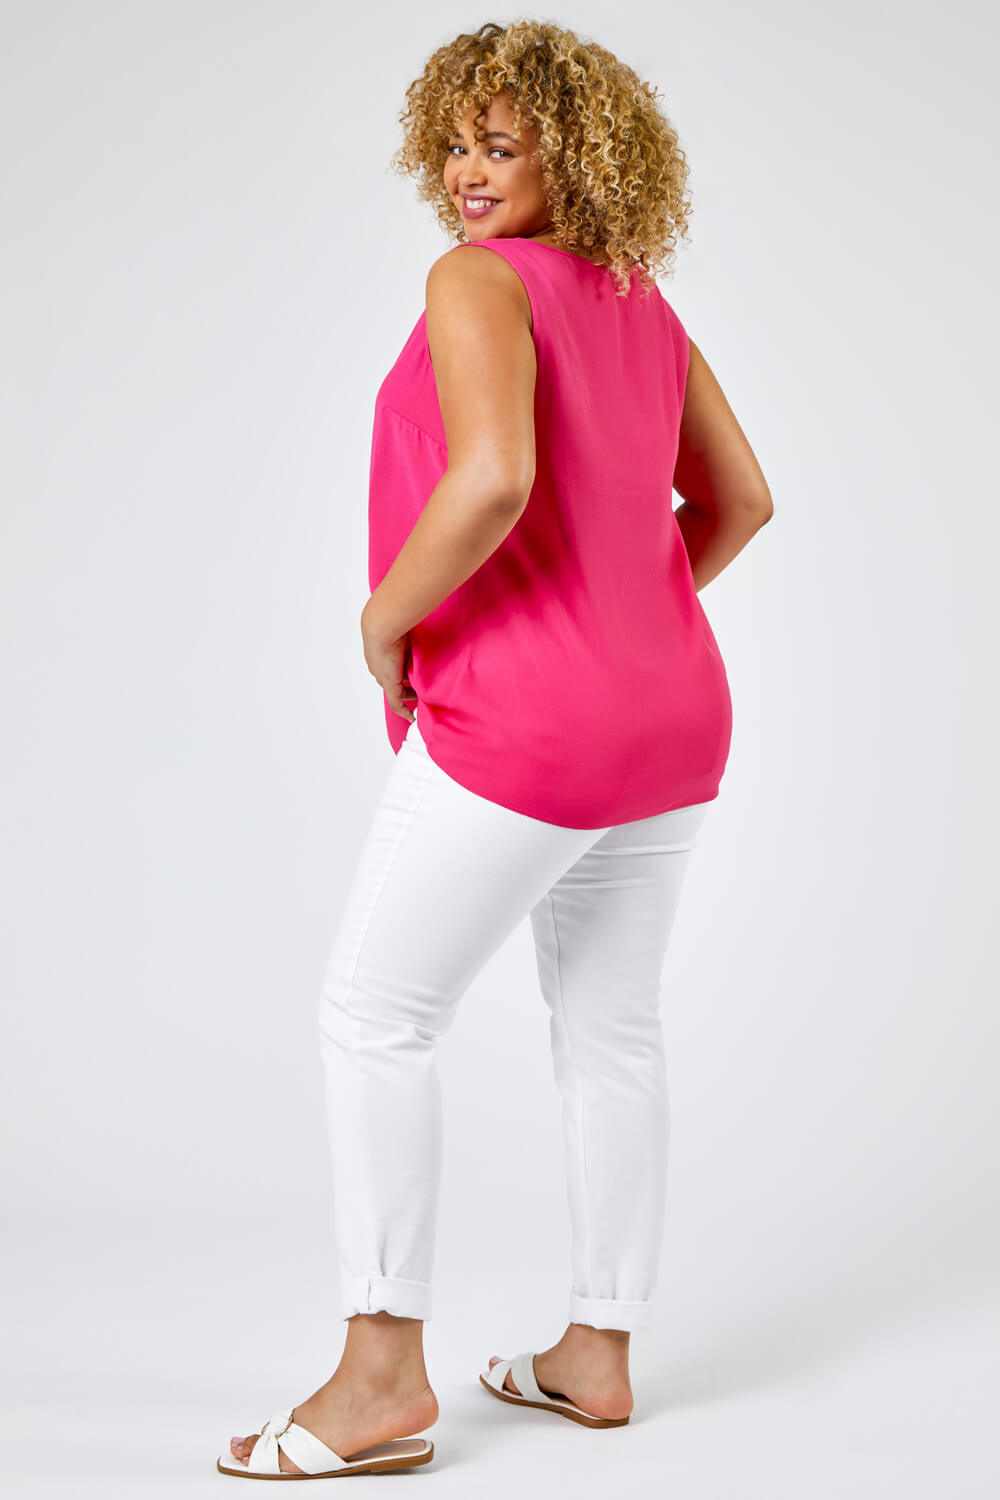 PINK Curve V-Neck Pleat Tank Top, Image 2 of 5